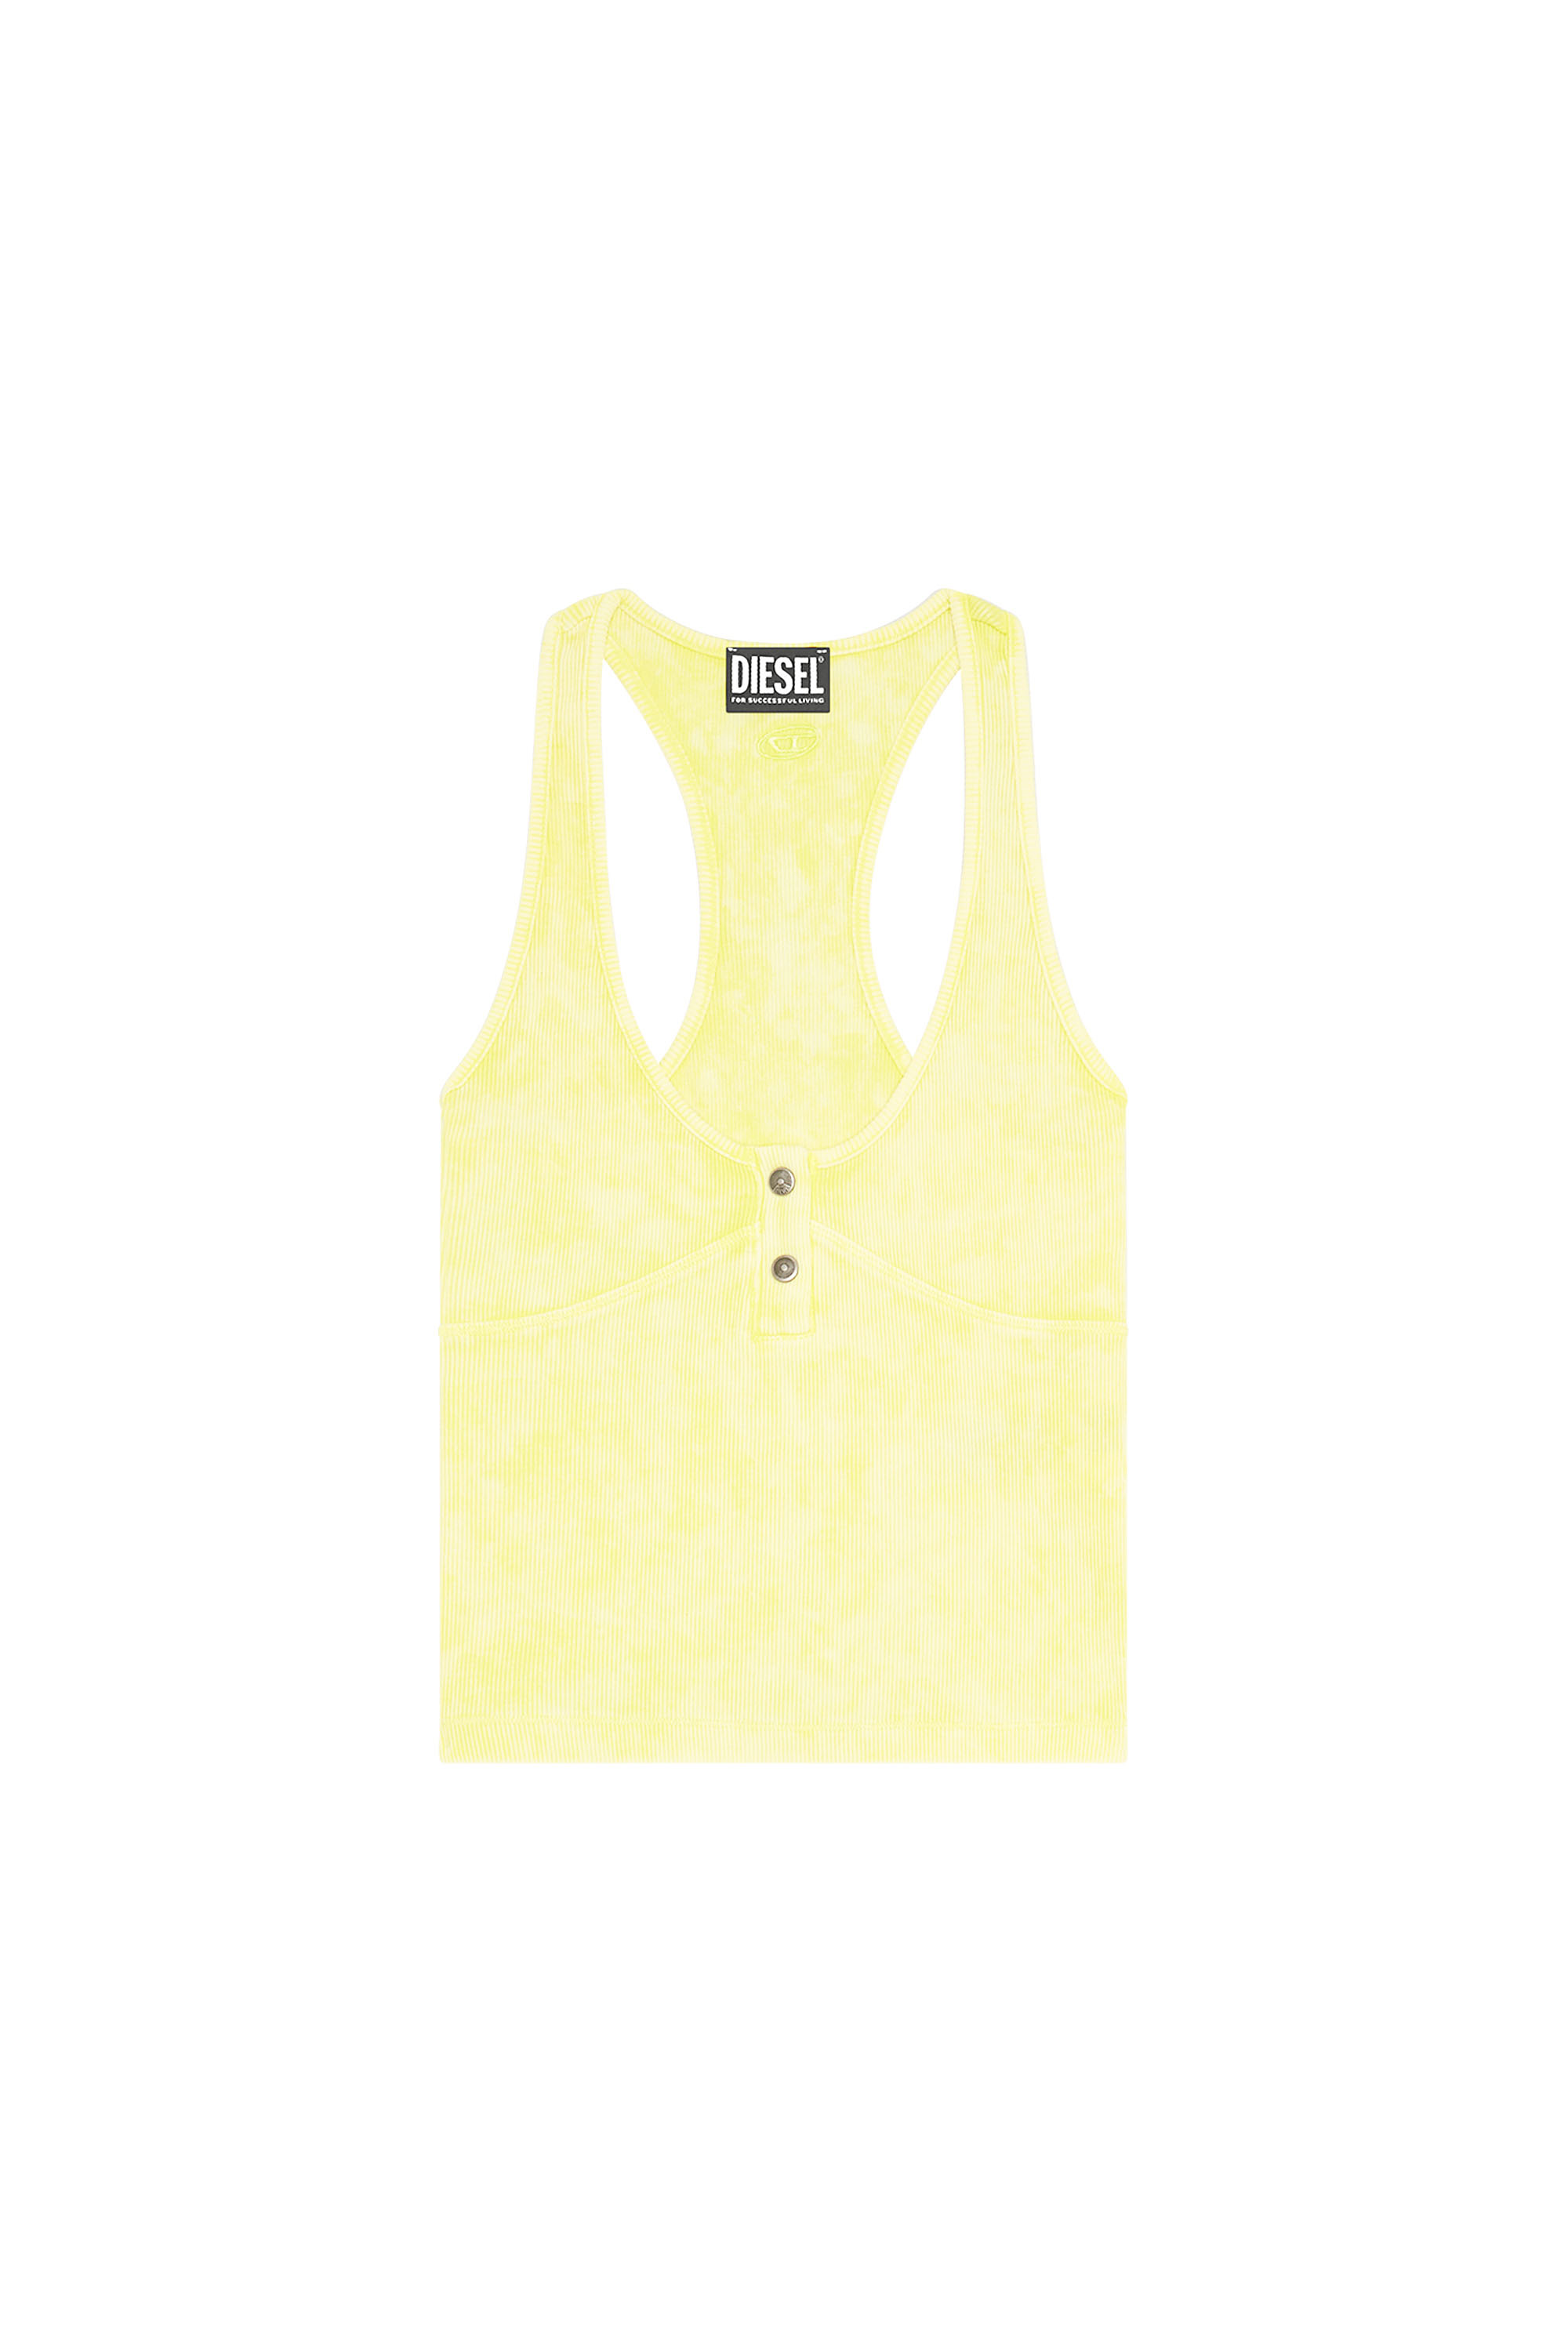 Diesel - T-ANIESSE, Giallo Fluo - Image 1